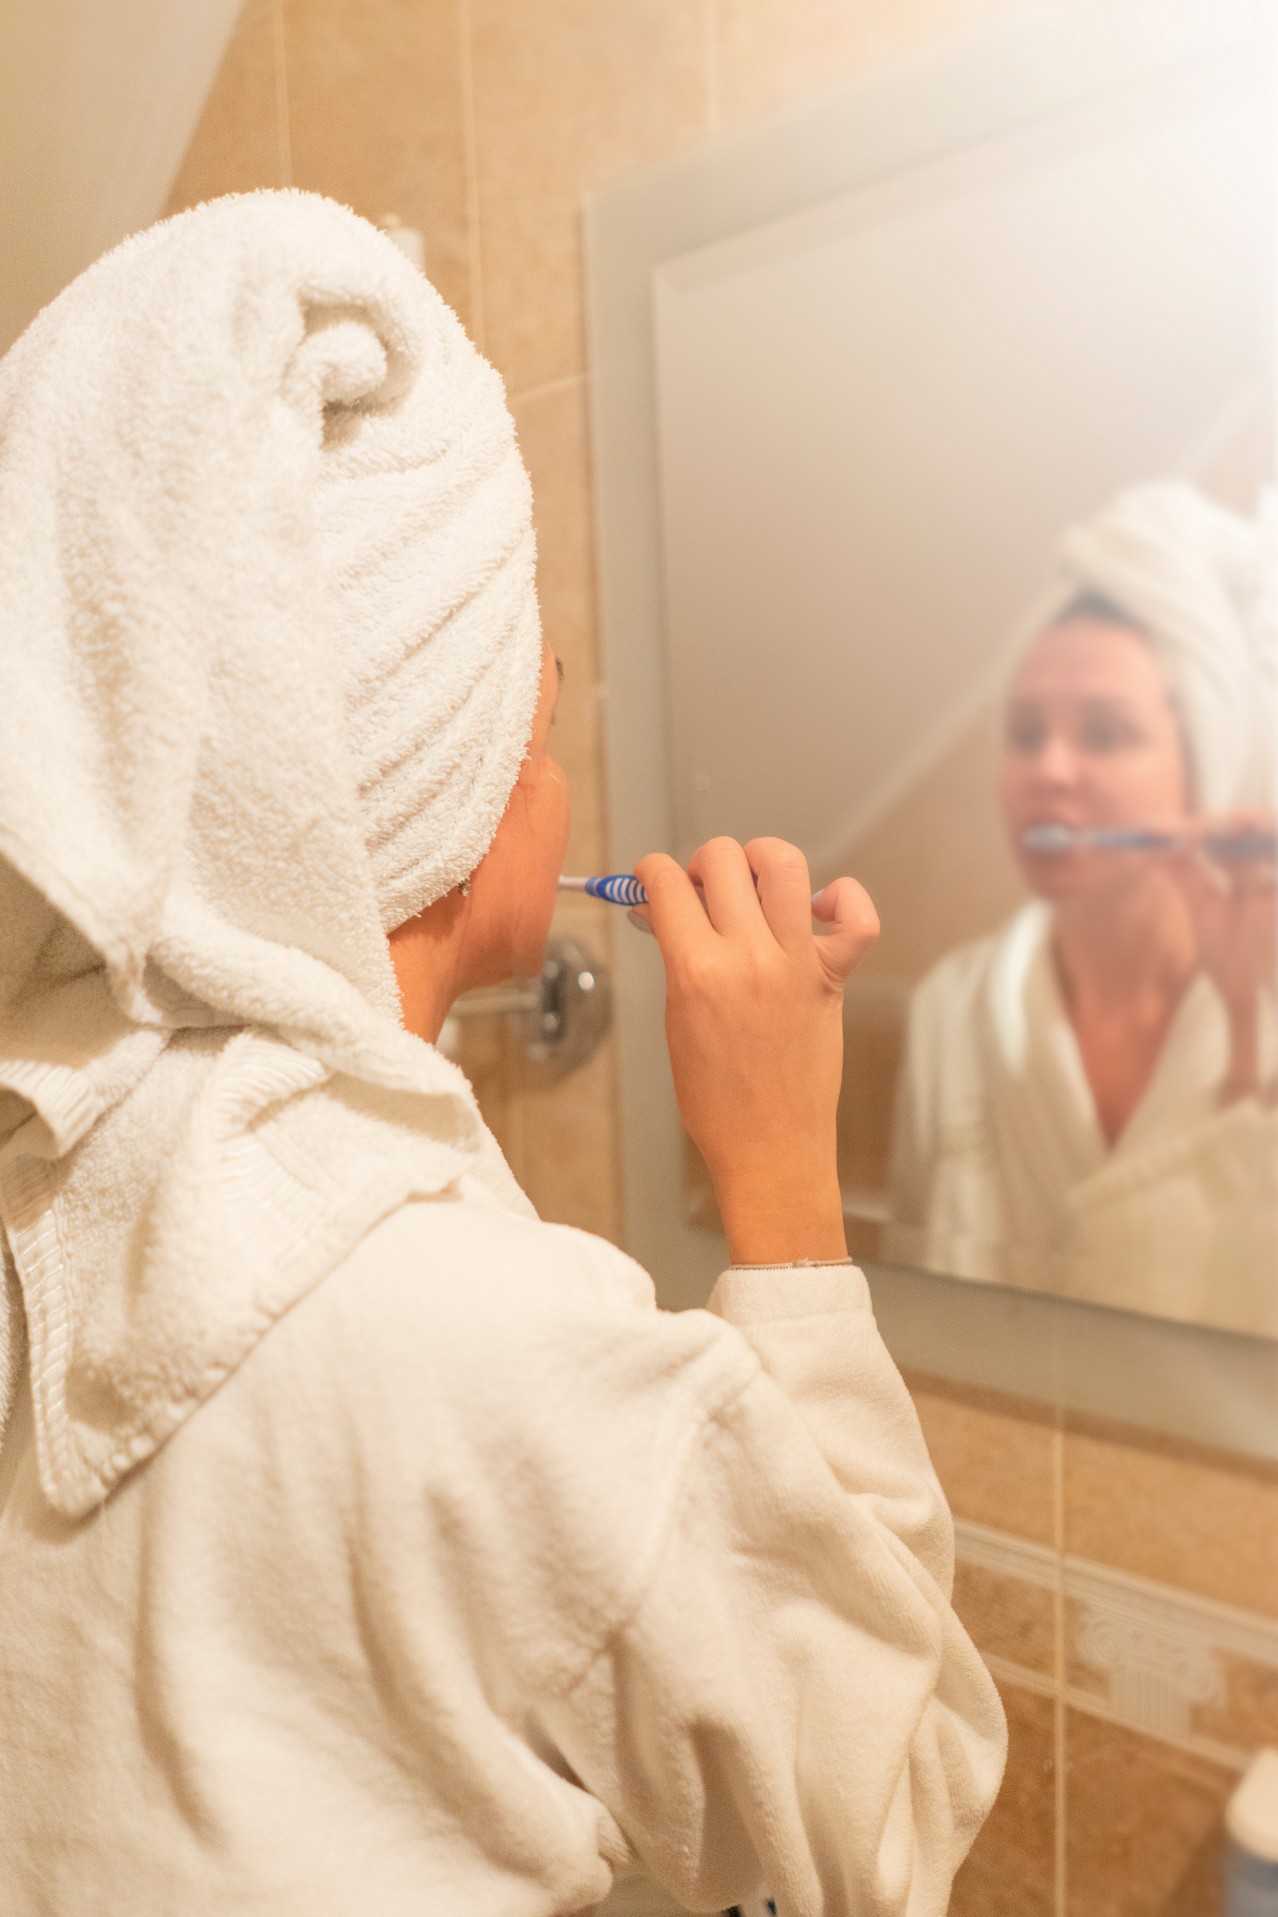 A Young Woman is brushing Teeth in Front of a Mirror in the Bathroom 